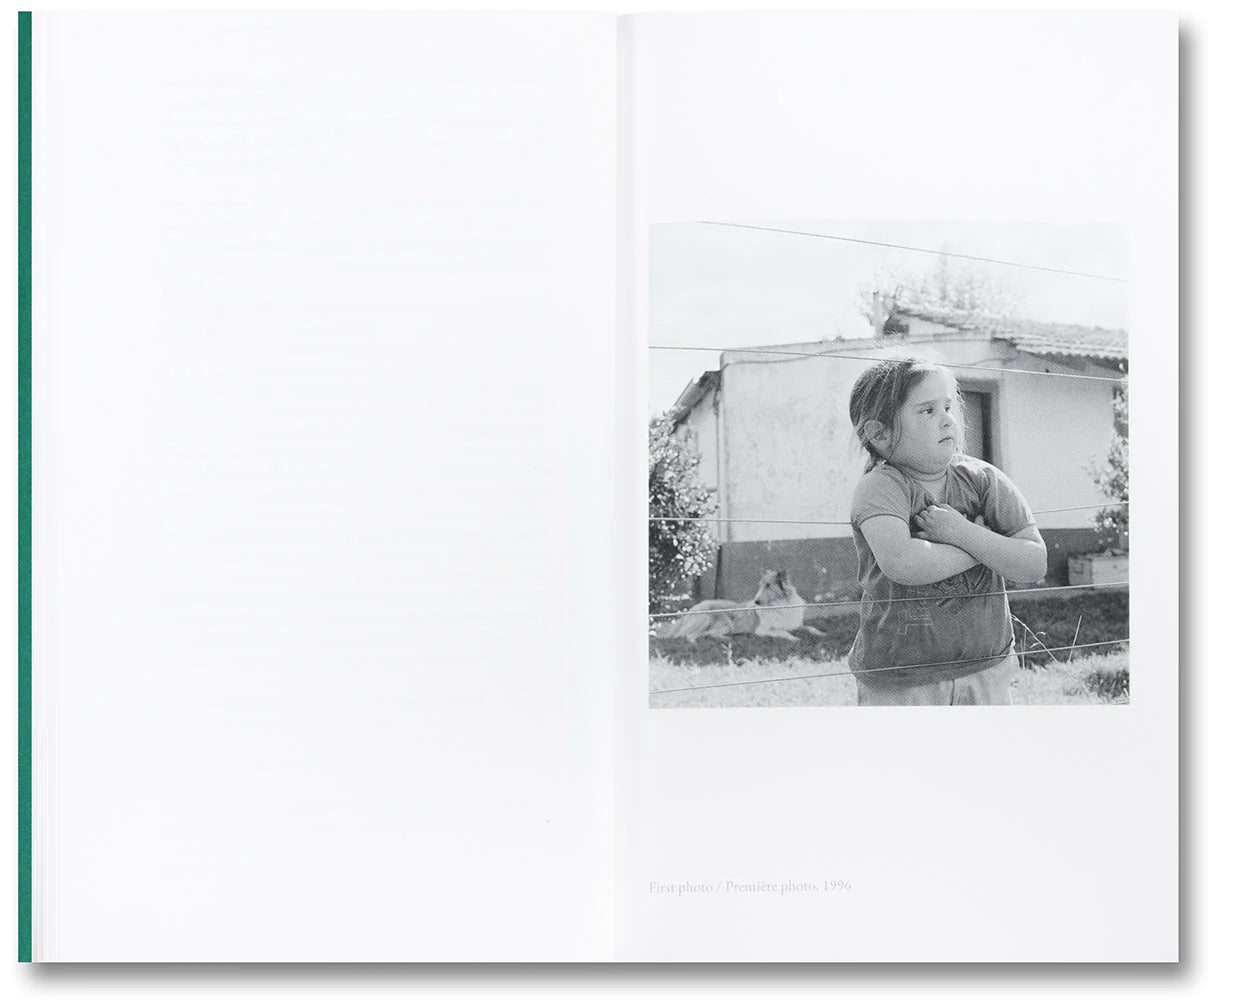 Alessandra Sanguinetti - Over Time: Conversations about Documents and Dreams